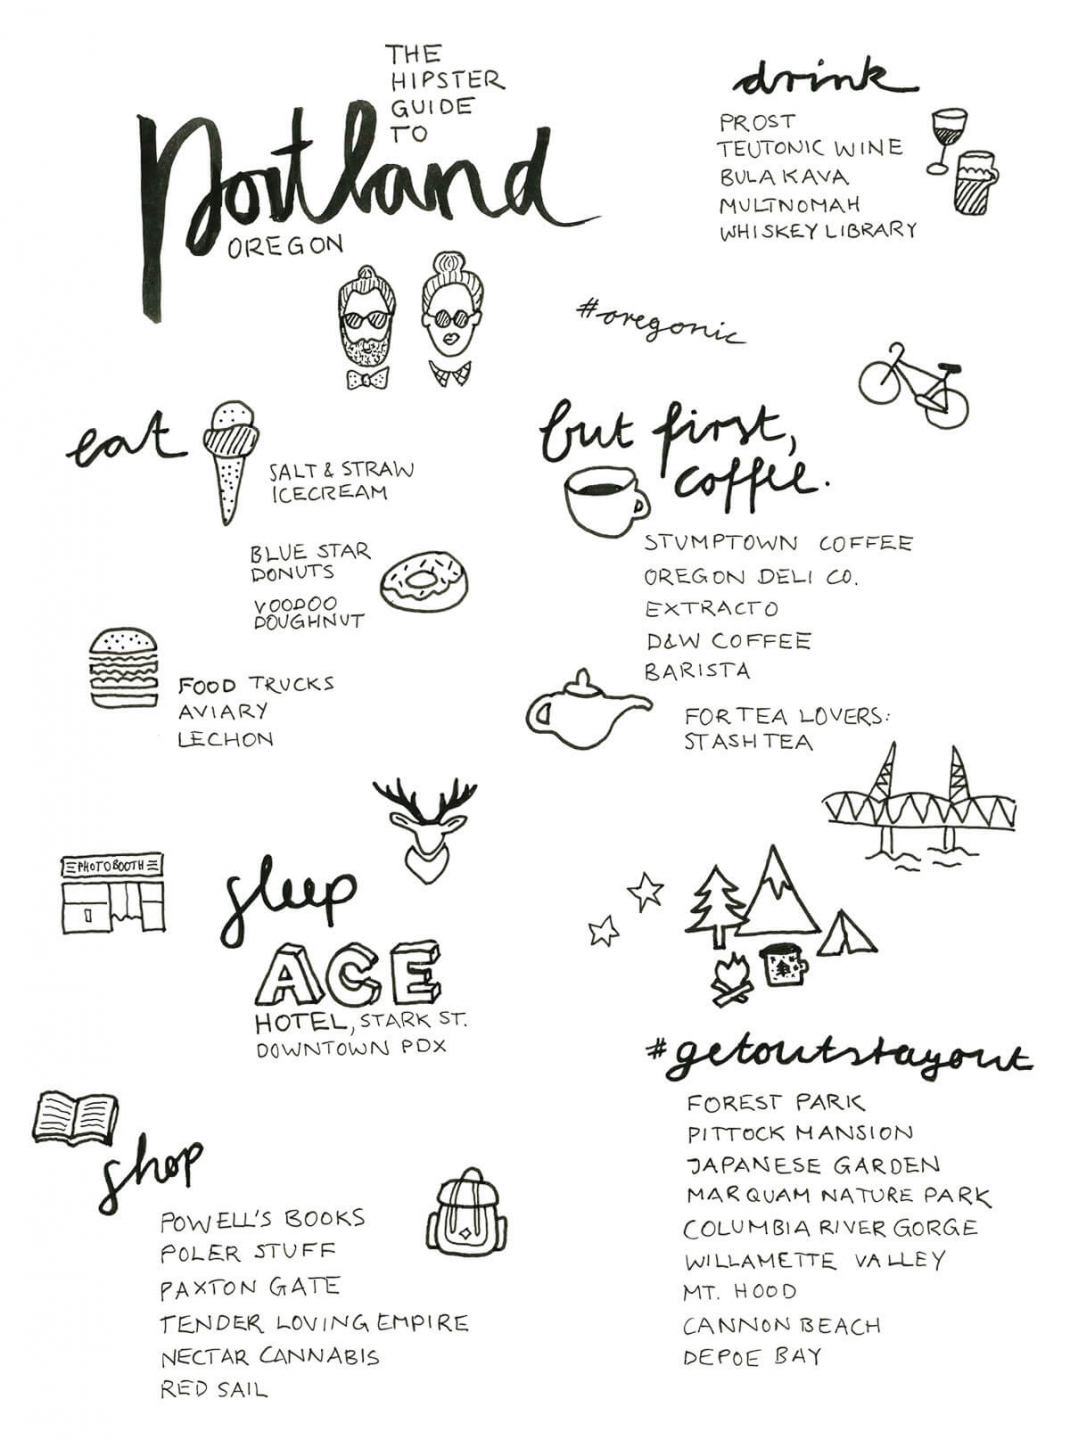 Hipster-Guide-to-Portland-Oregon-Scribble